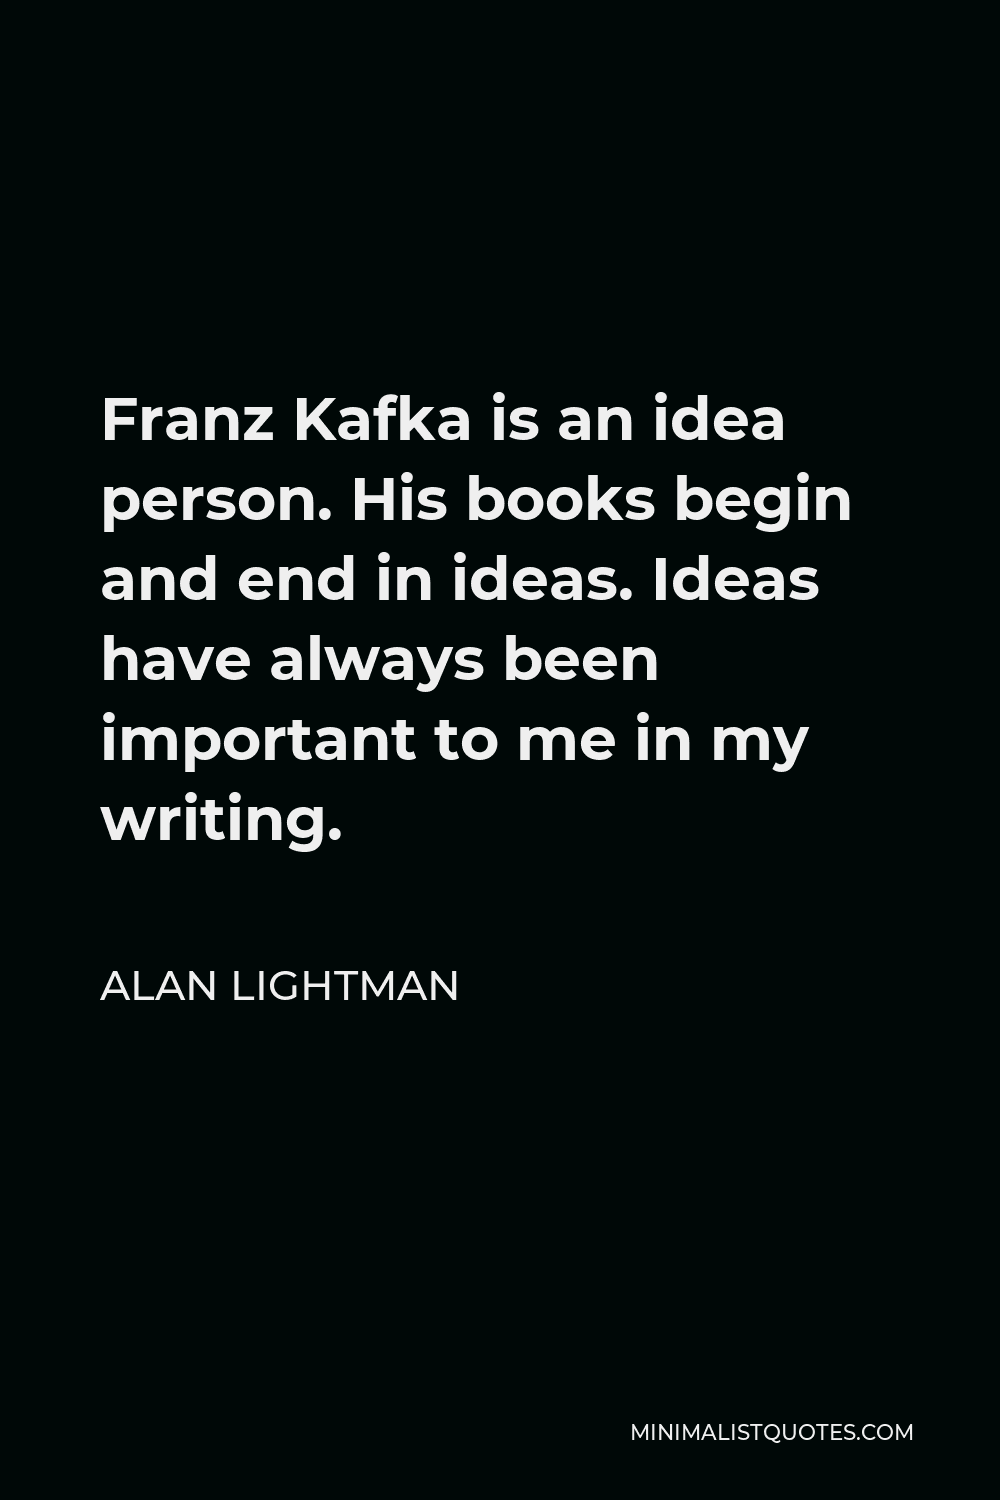 Alan Lightman Quote - Franz Kafka is an idea person. His books begin and end in ideas. Ideas have always been important to me in my writing.